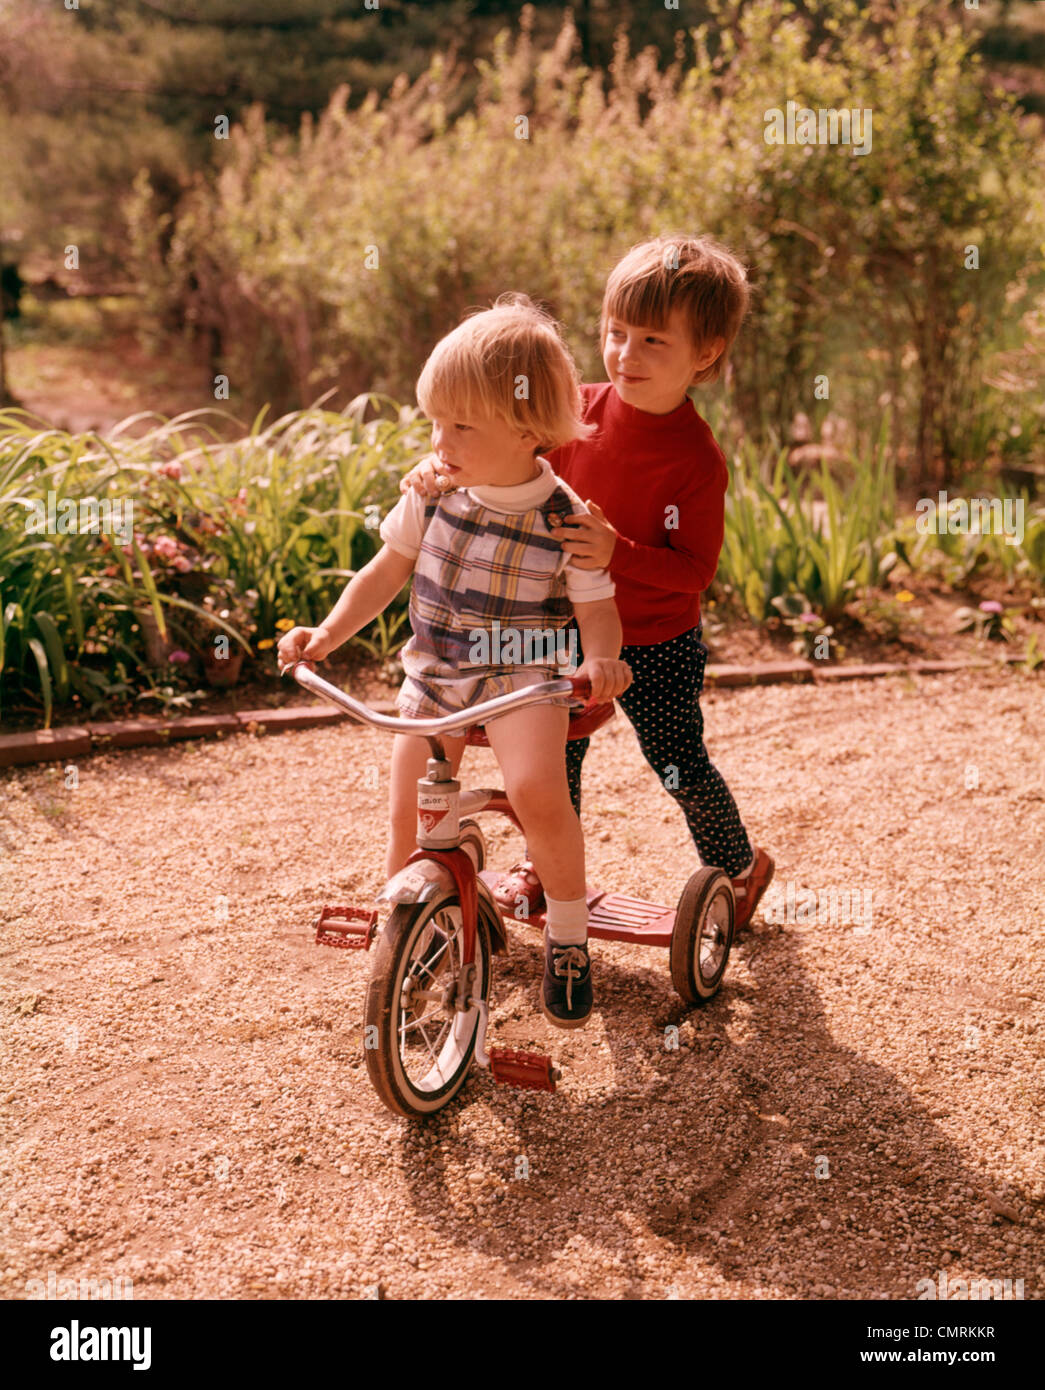 1970 1970 TWO KIDS RIDING TRICYCLE BIKE BICYCLE PLAYING PLAY TODDLER BOY GIRL PLAY RETRO Stock Photo